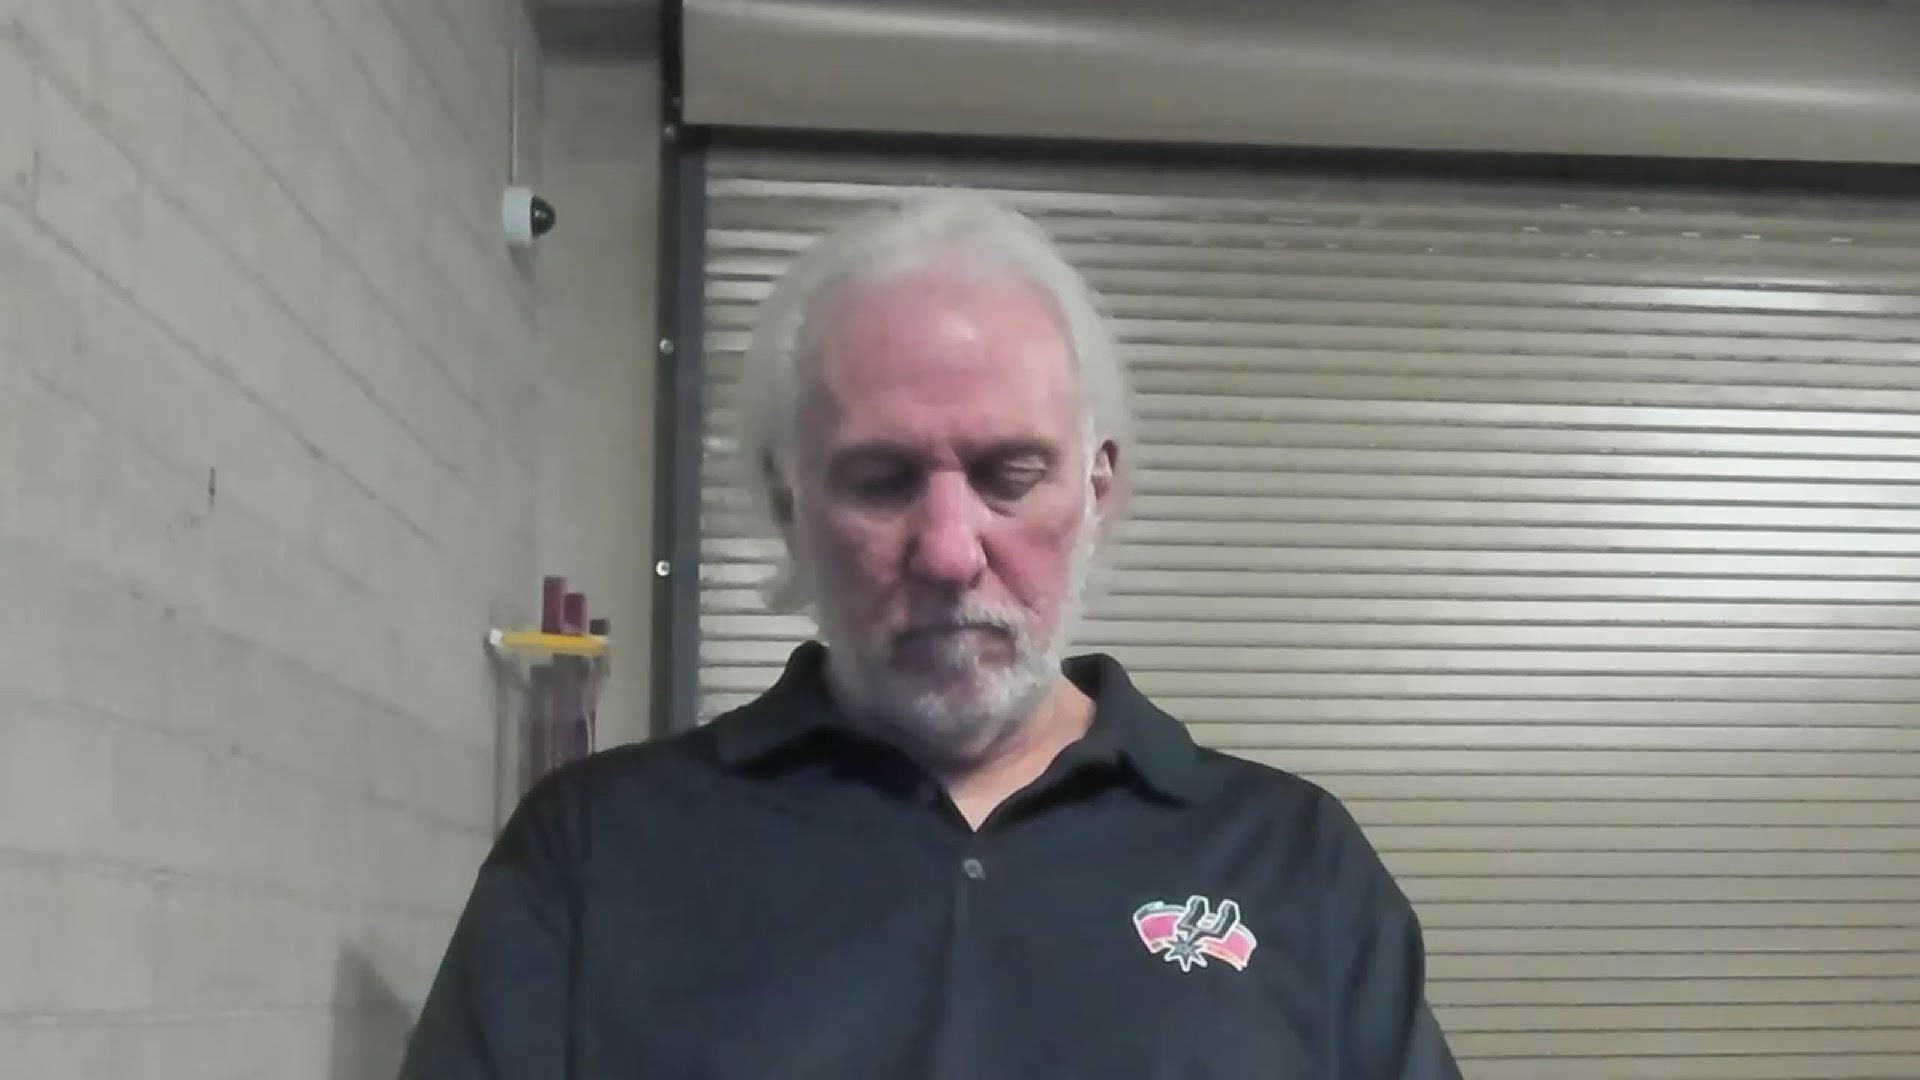 San Antonio squeaked out a big win against a great team, but Pop was a man of few words after the game.